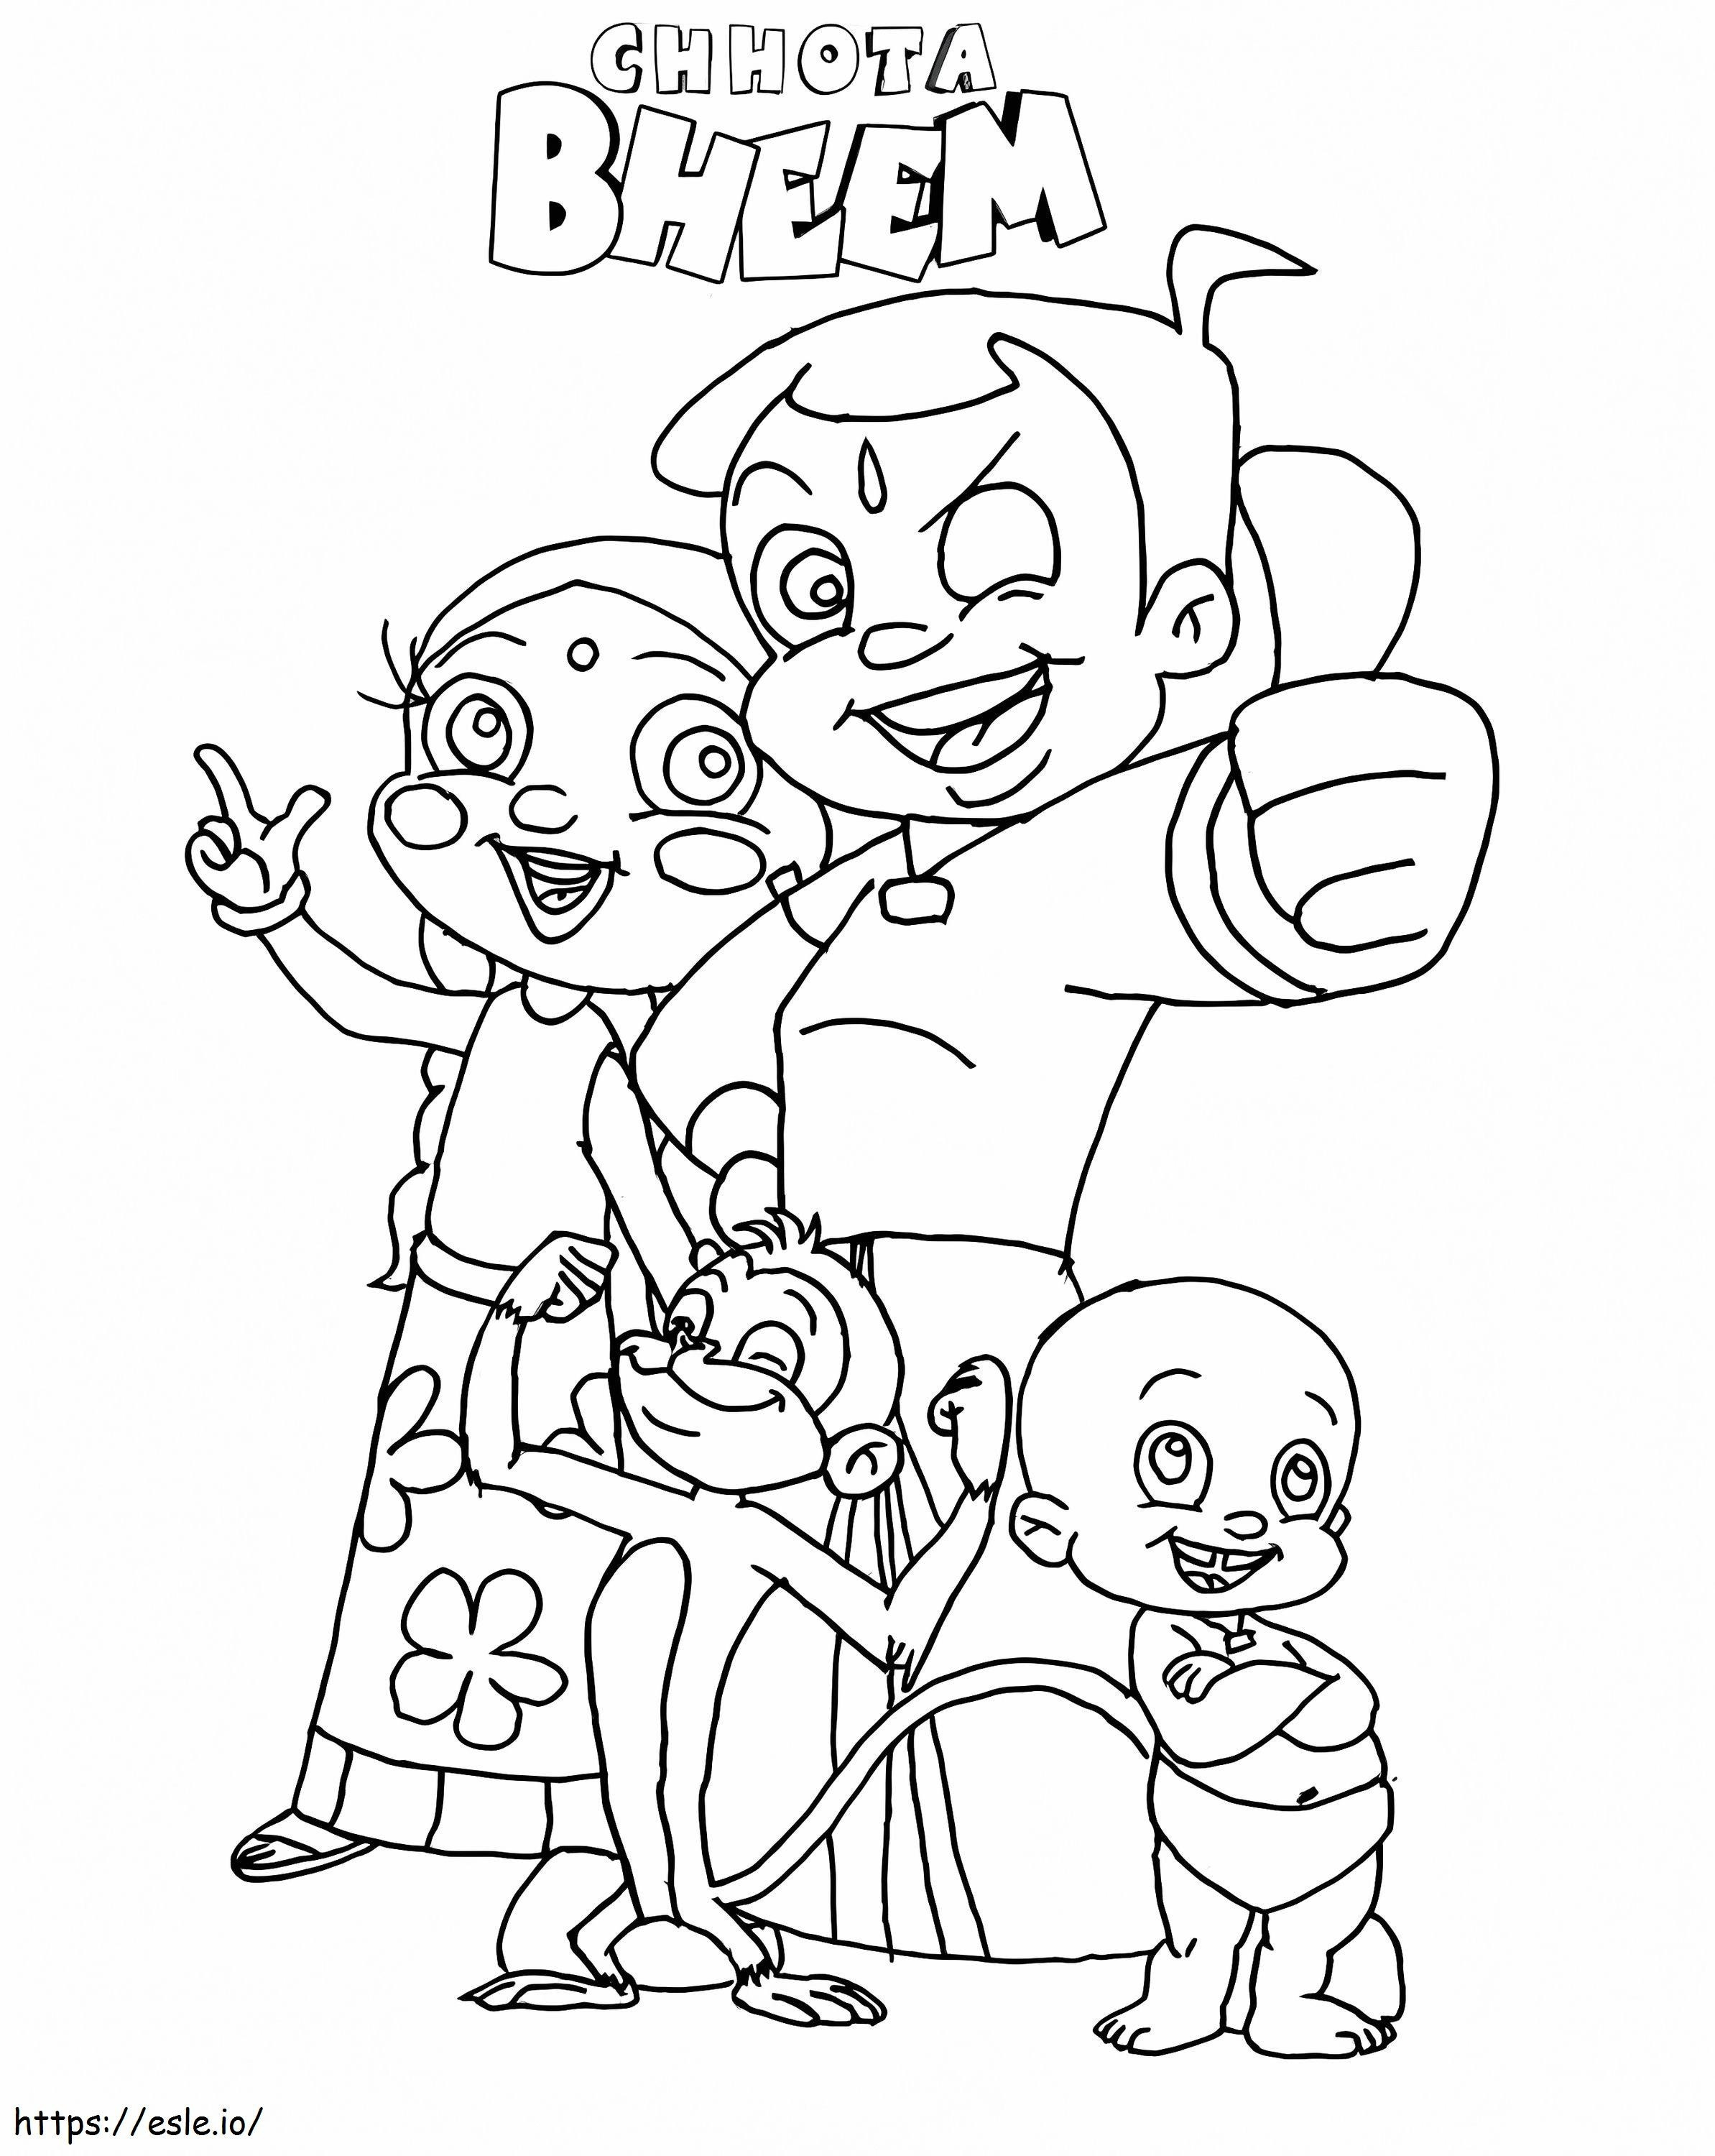 Chhota Bheem And Amigos coloring page